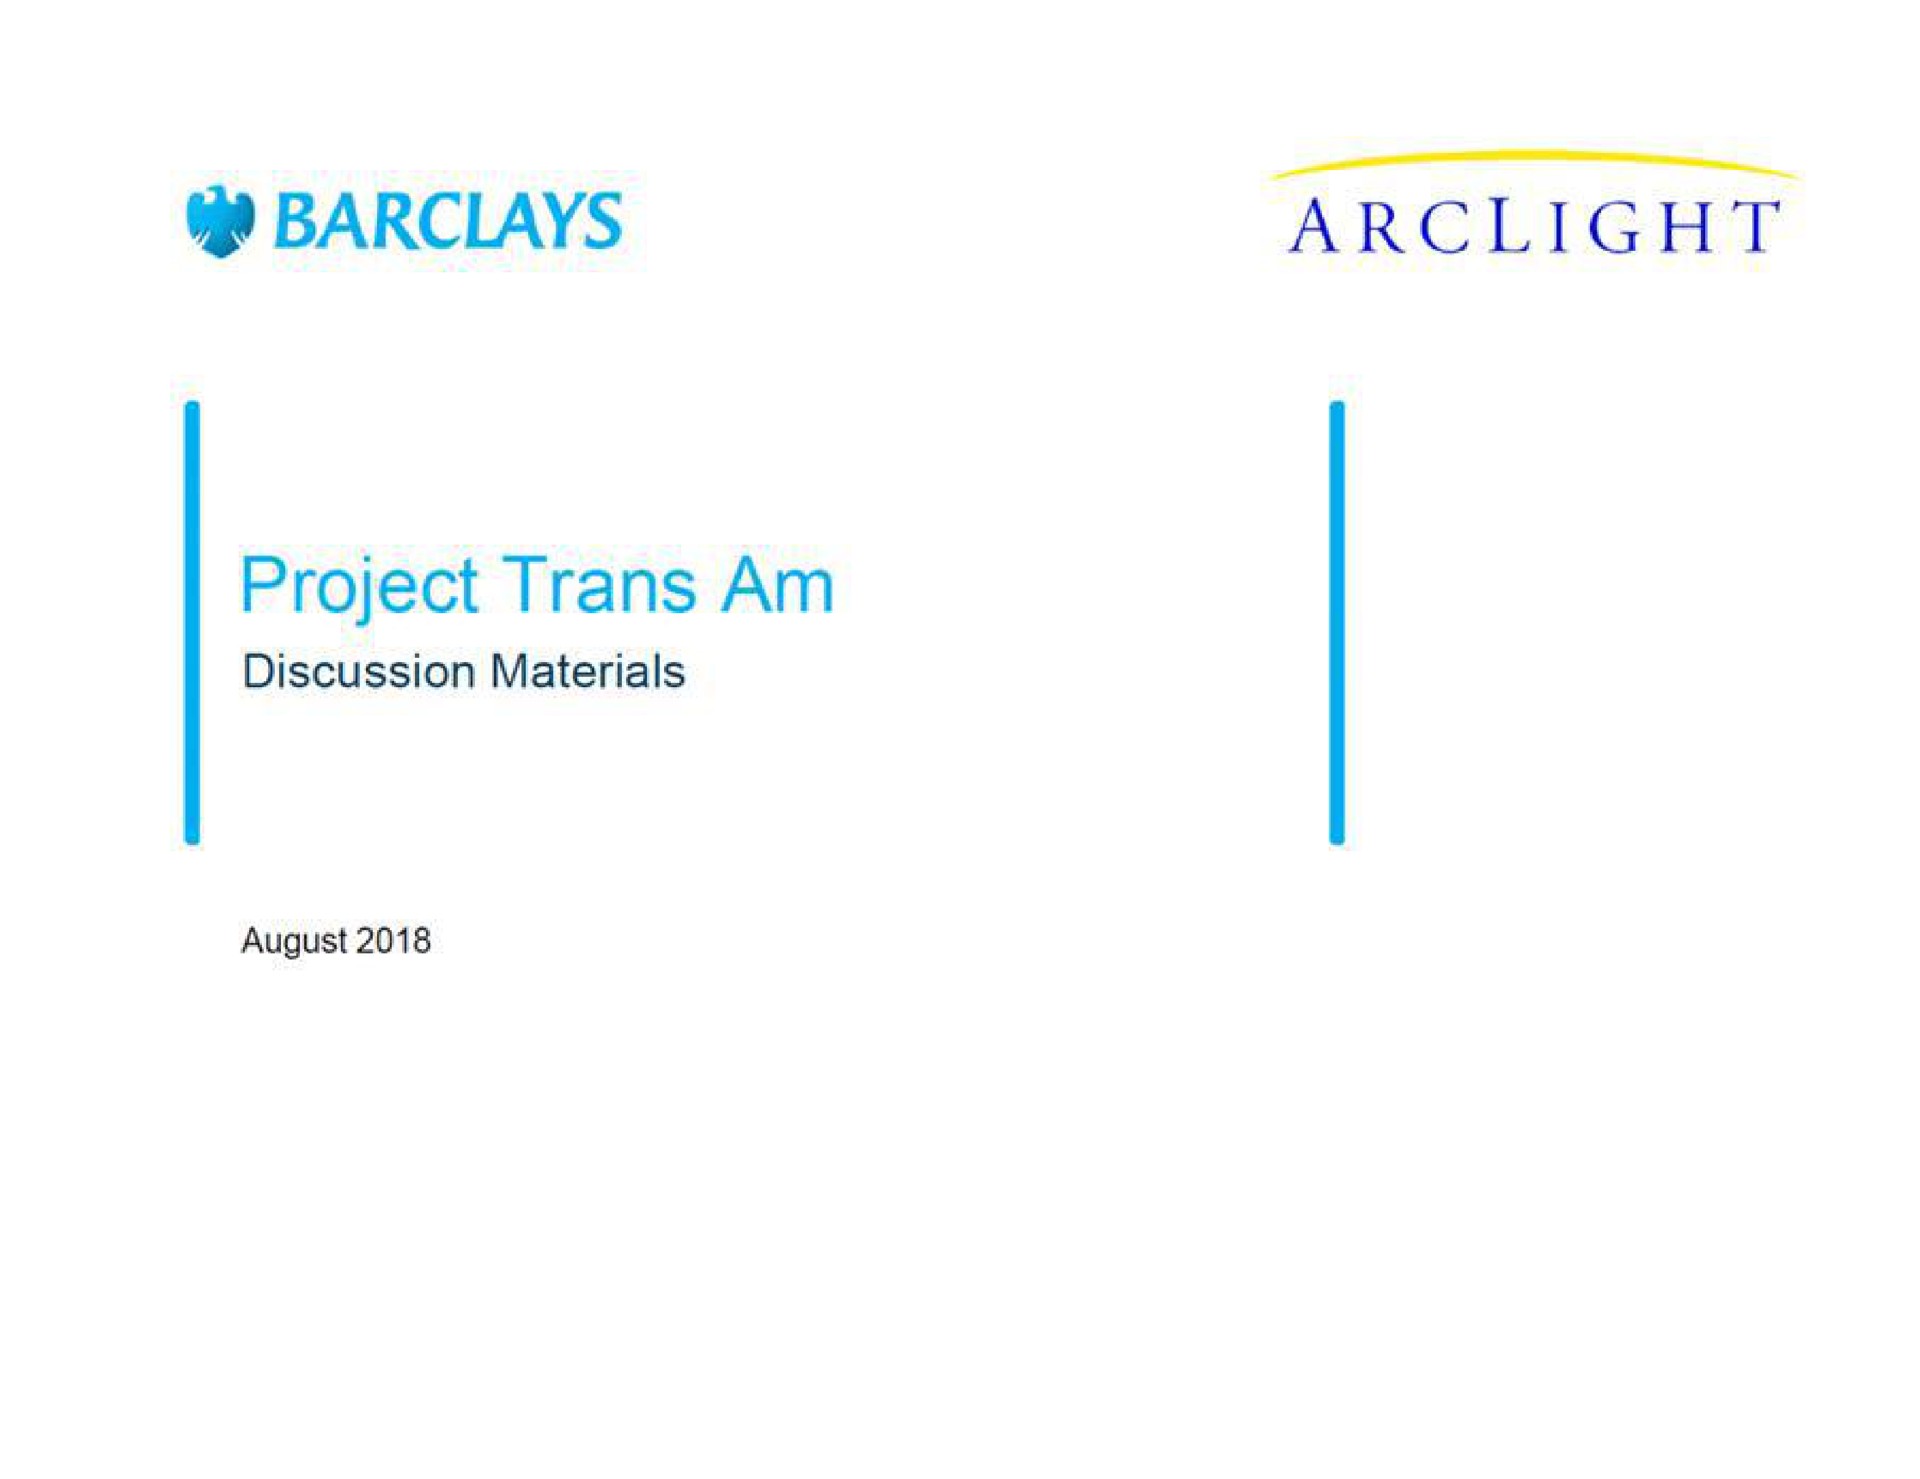 arc project am discussion materials august | Barclays